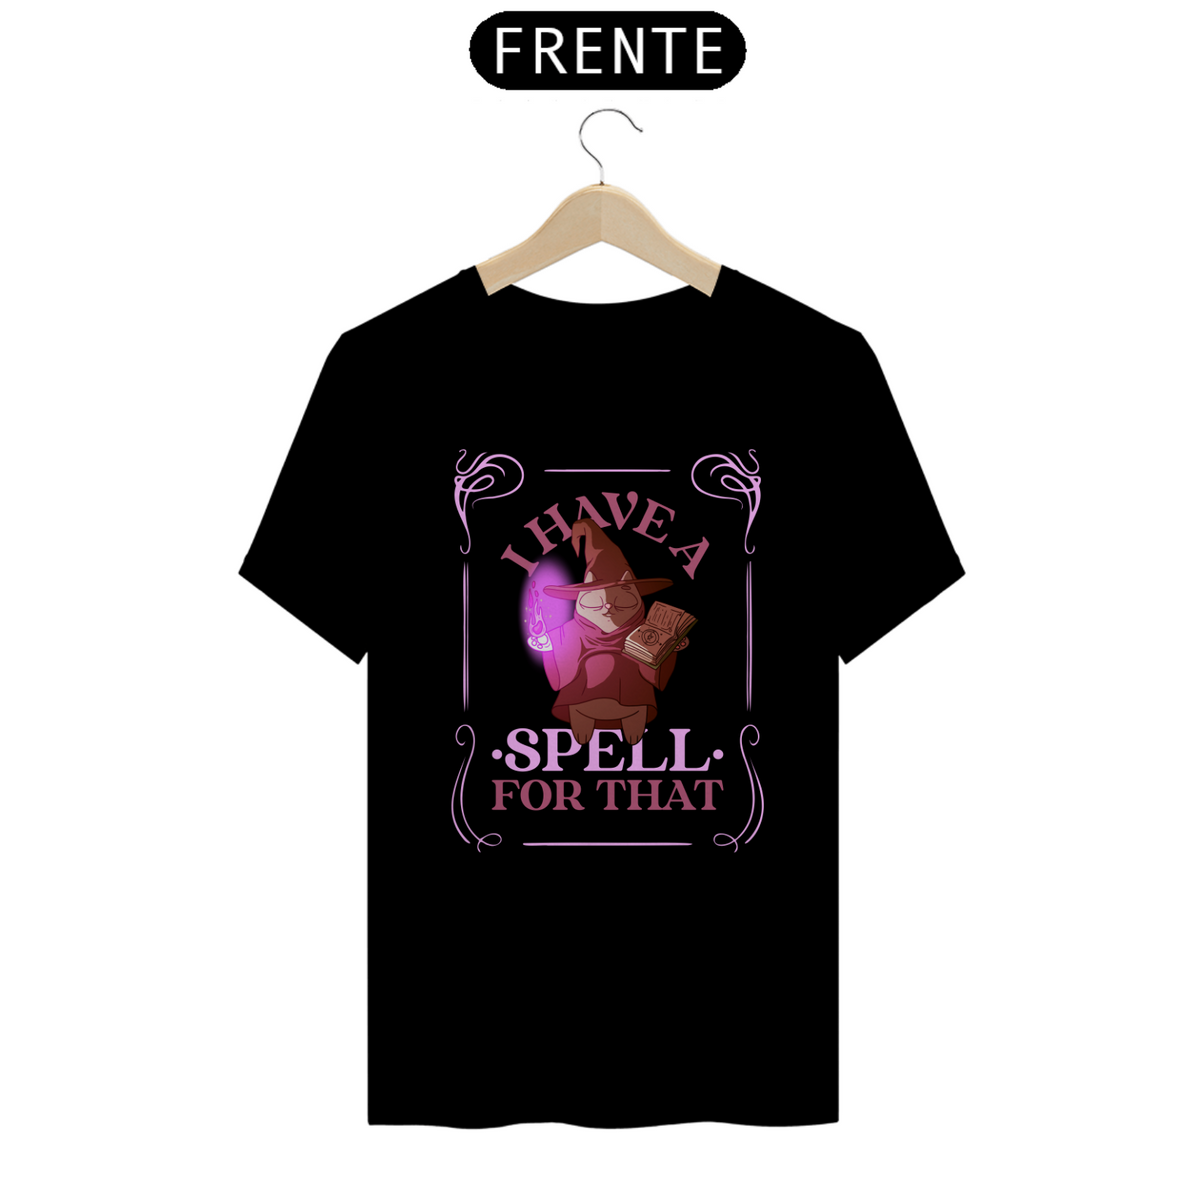 Nome do produto: I have a SPELL for that - RPG CATS CAMISETA UNISSEX